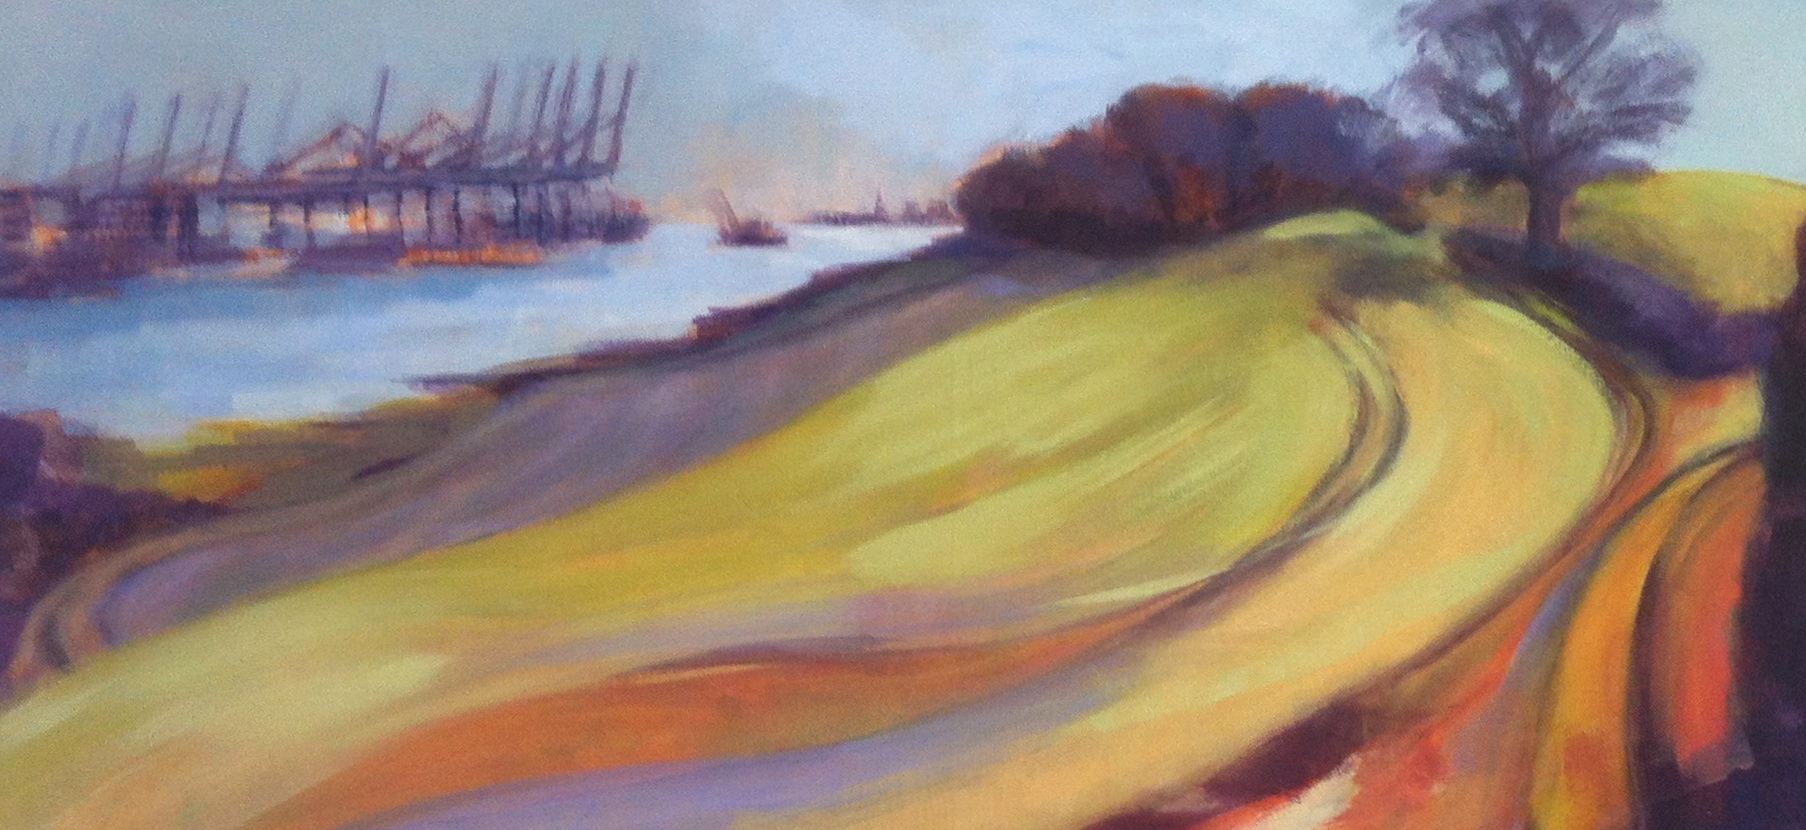 Shotley Landscape South, 2015, oil and acrylic on canvas, 71 x 91cm - Version 2